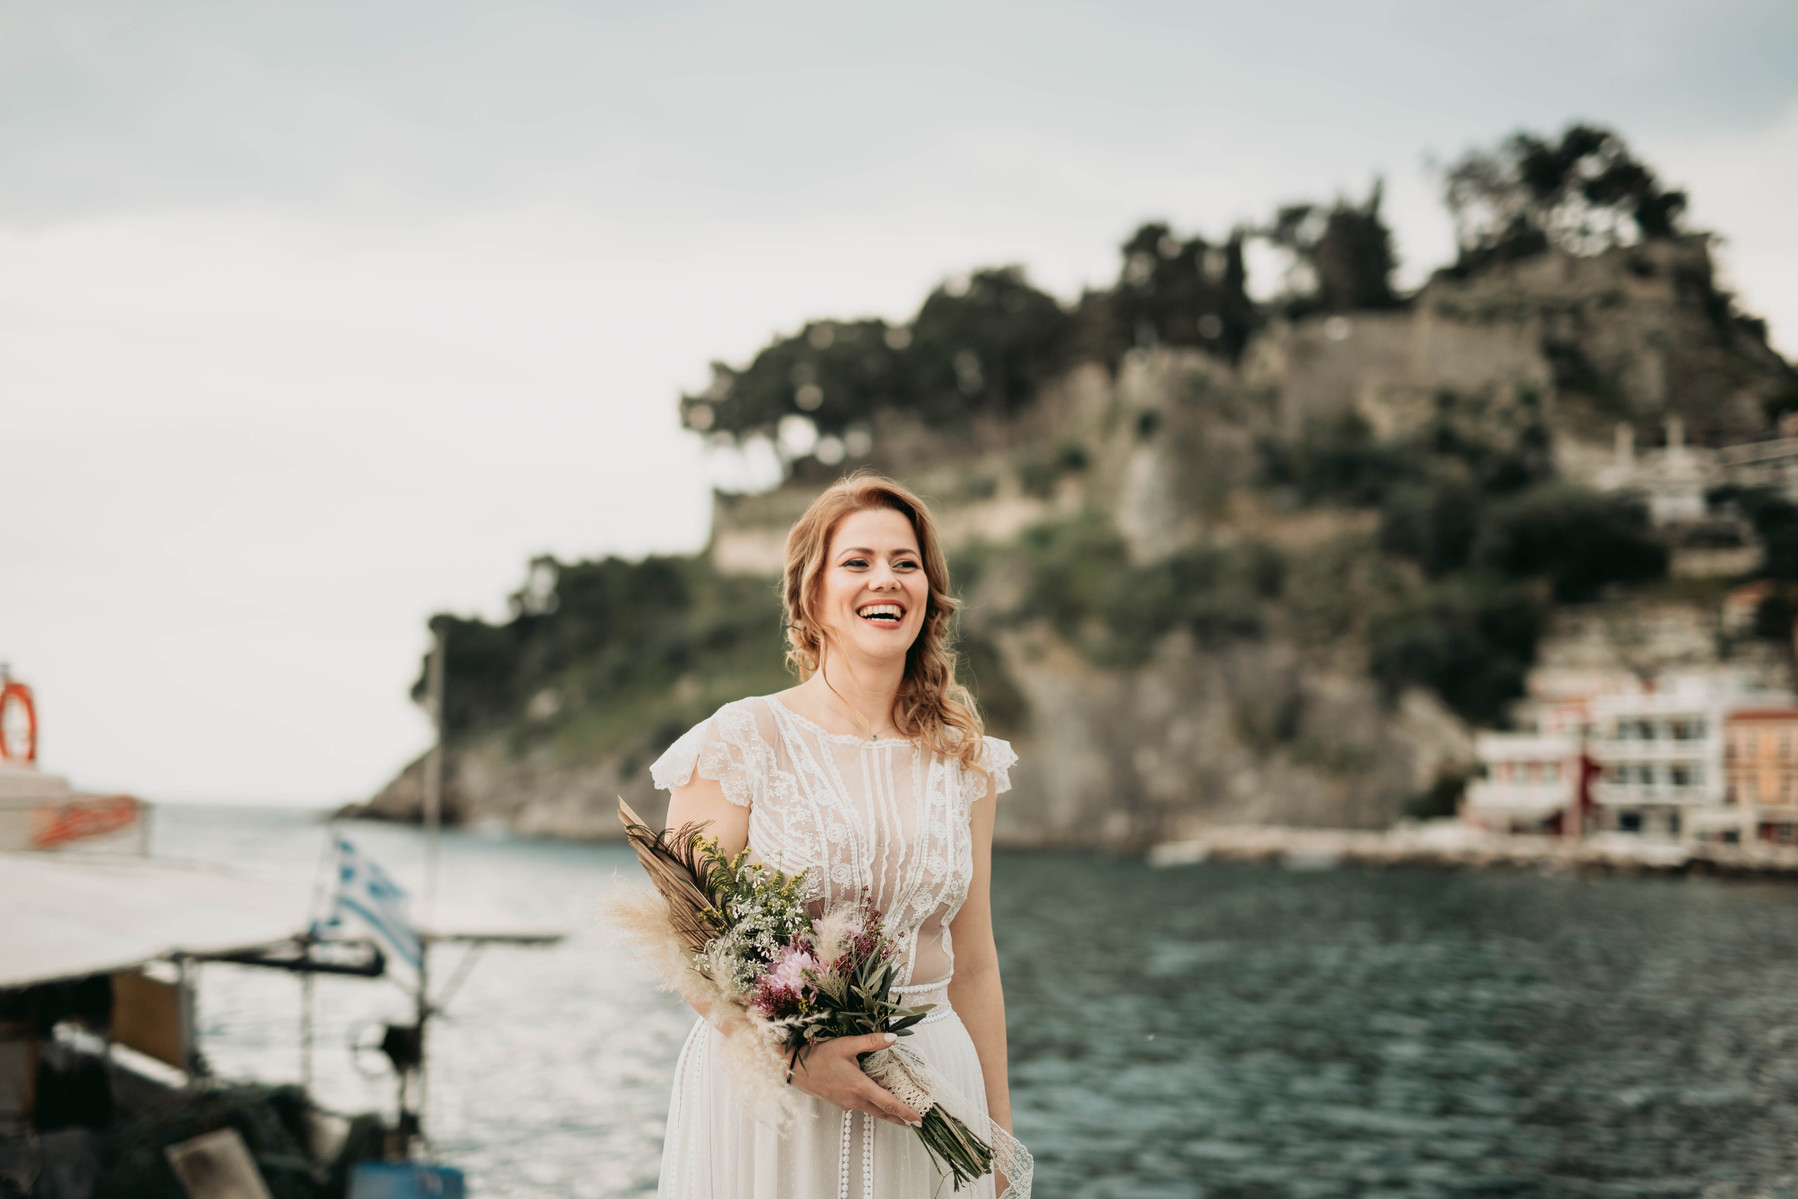 Bride with a flower bouquet, in the background the beautiful old castle of Parga in Greece.